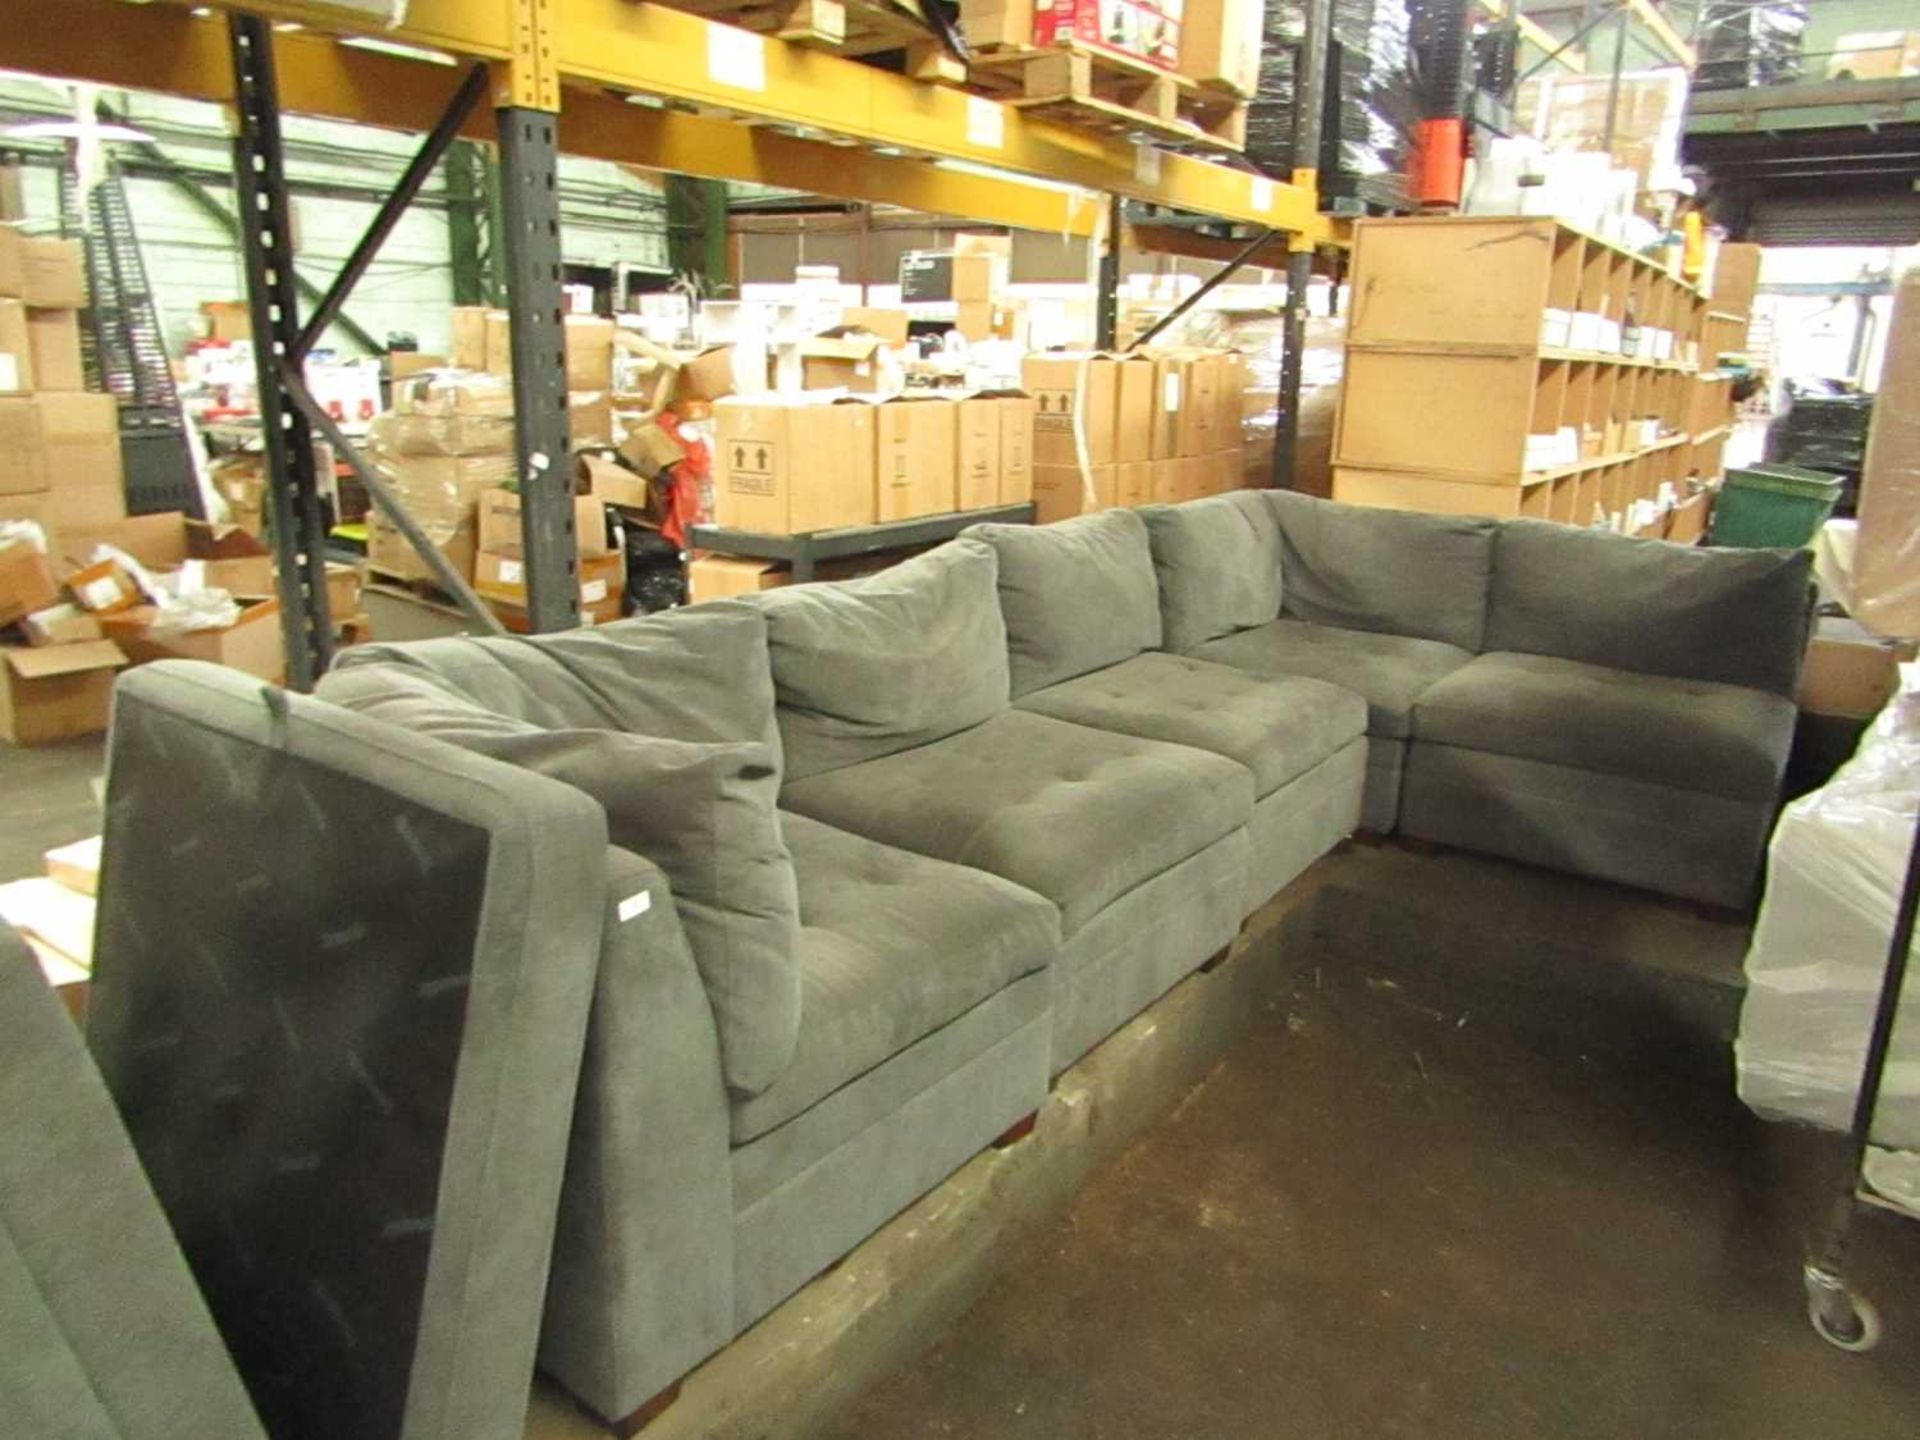 VAT M-Star 6 piece sectonal sofa, in good condition but could do wiuth a clean and there are a few - Image 2 of 2